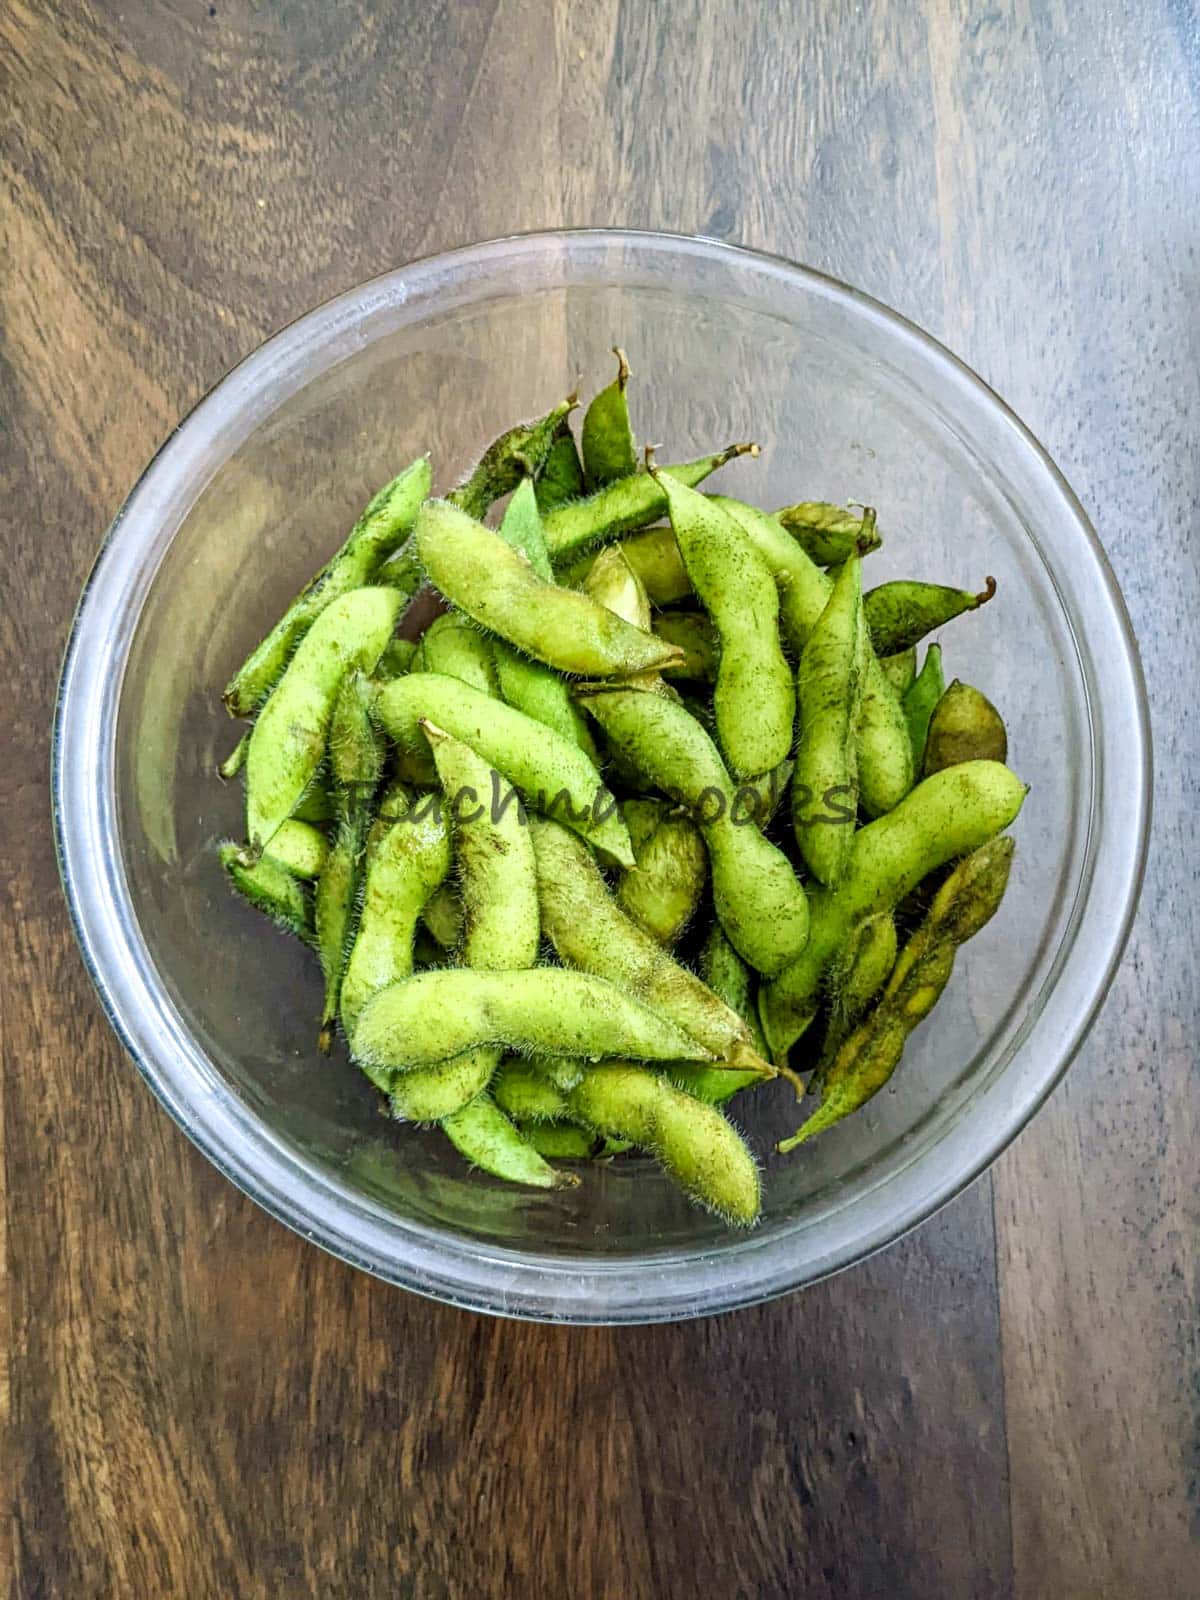 Washed and dried edamame pods